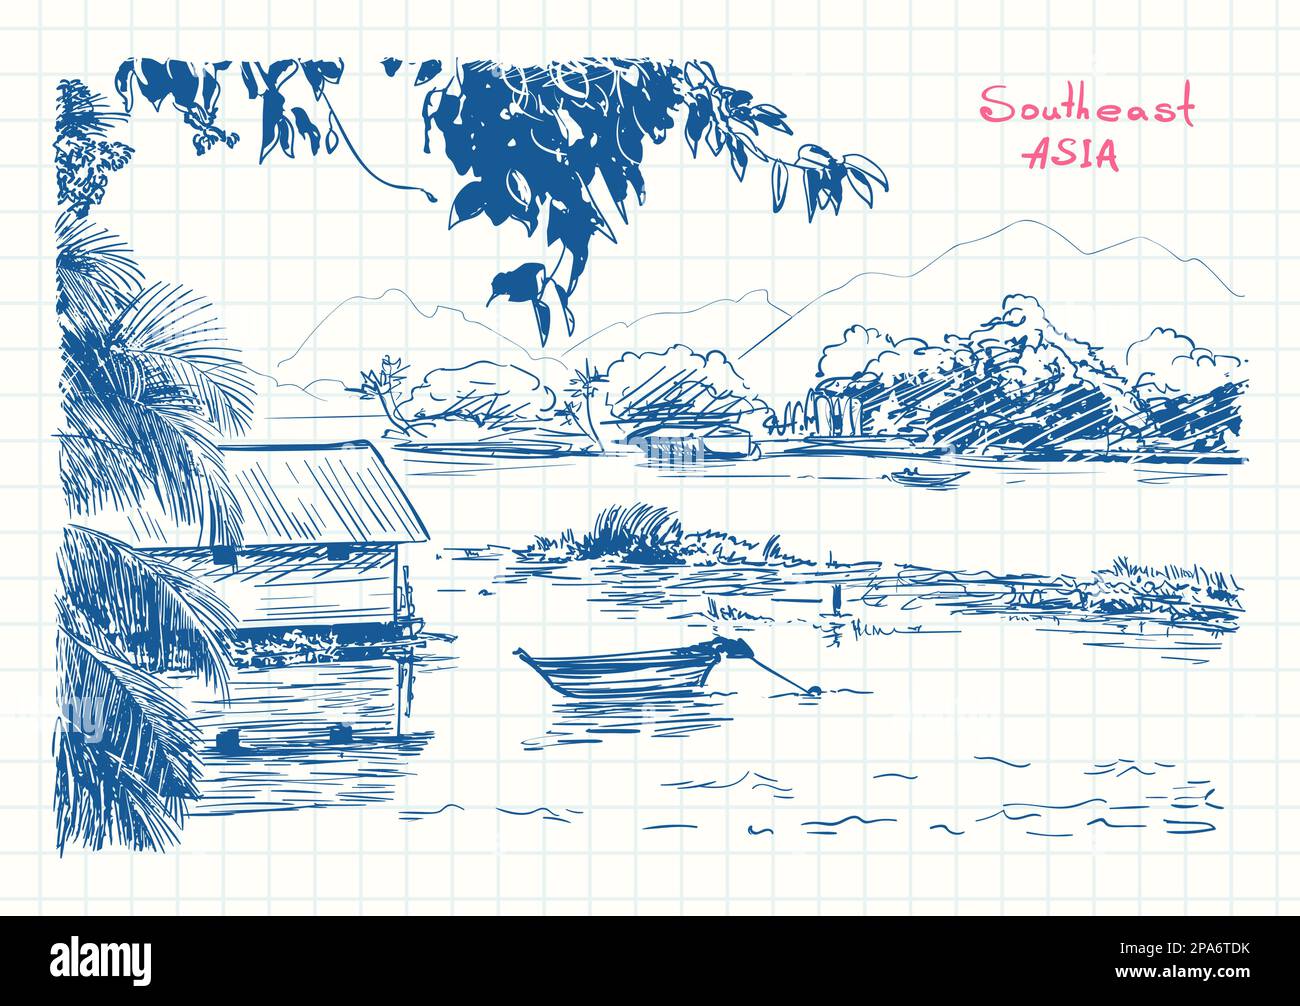 Boat and house on river in Southeast Asia, Blue pen sketch on square grid diary page, Hand drawn vector illustration Stock Vector